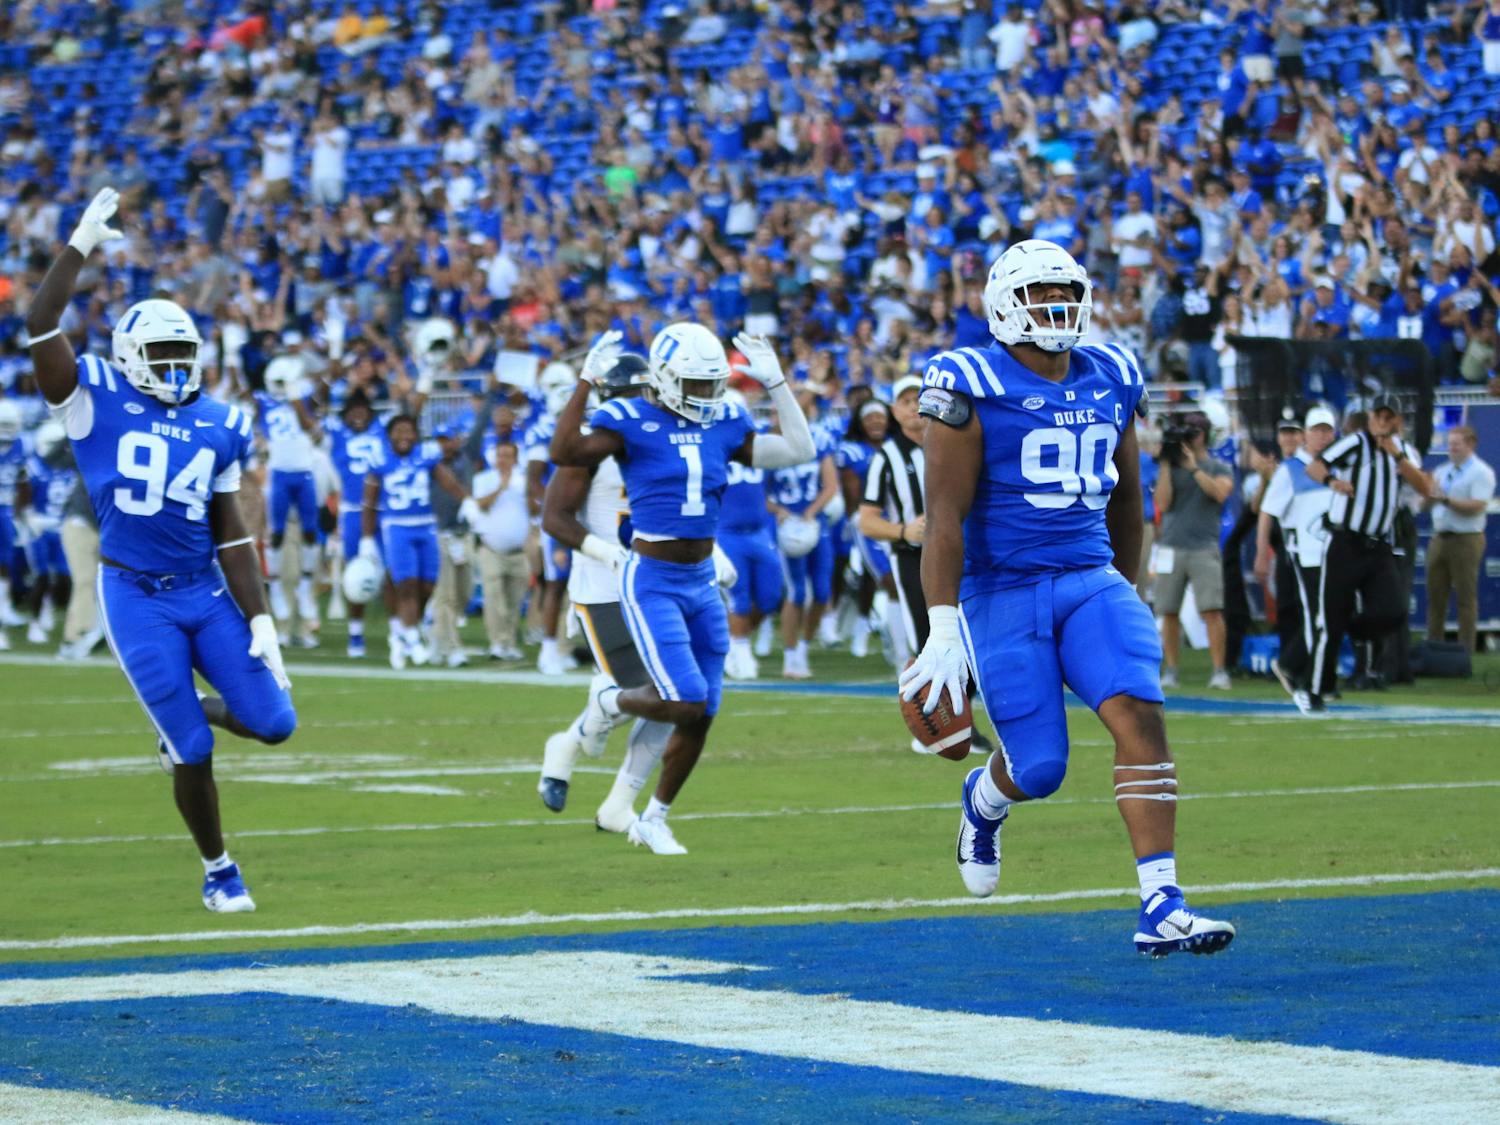 Duke dominated in the first half against North Carolina A&amp;T, jumping out to a 28-6 lead.